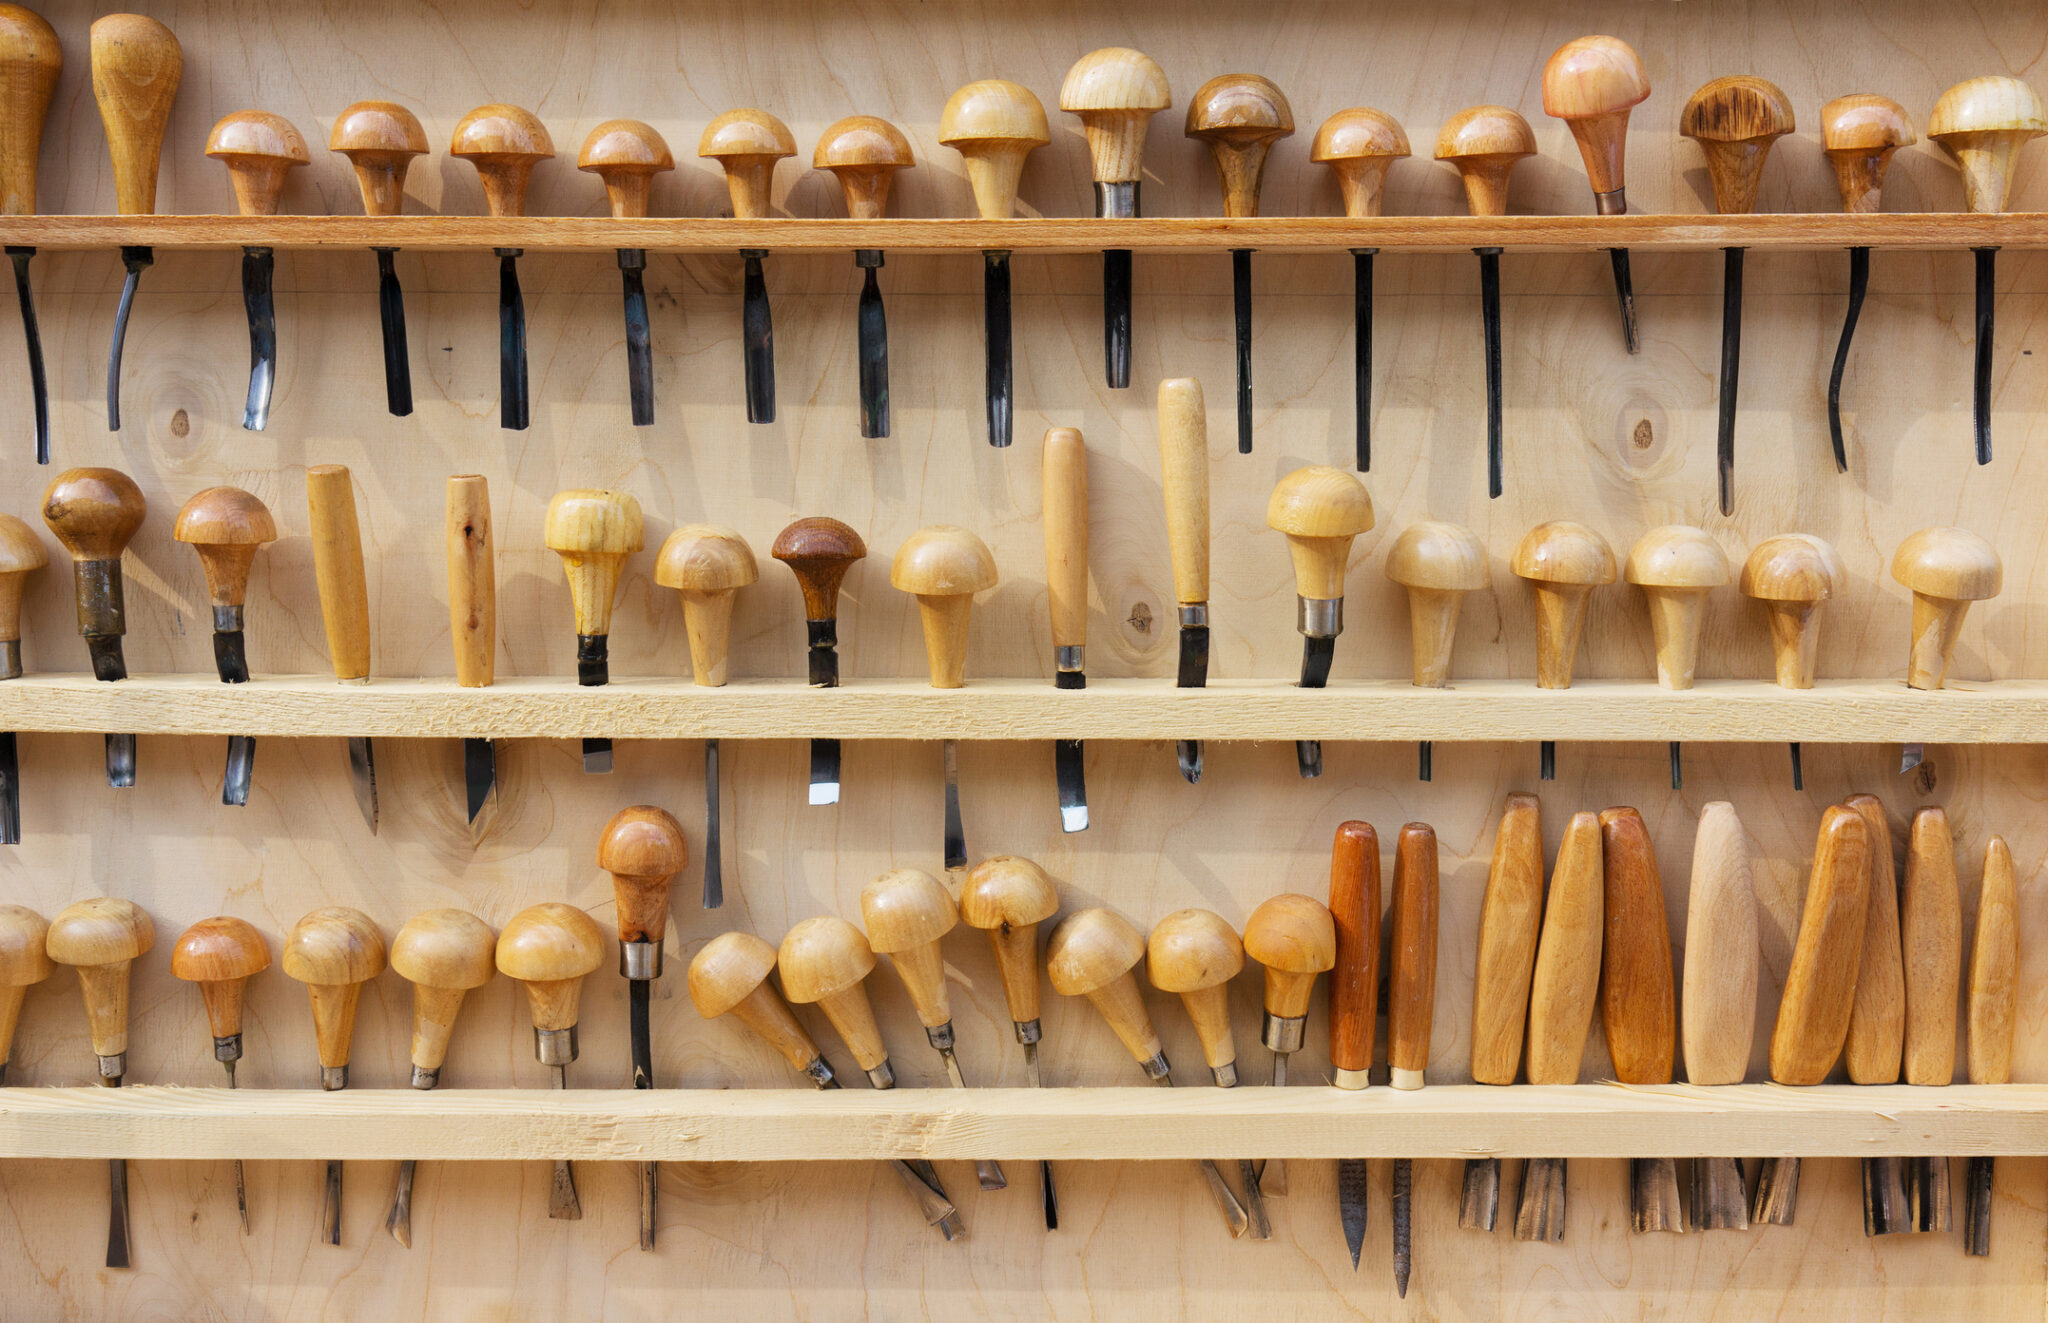 Woodworking tools neatly arranged on shelves against a wooden wall. Various chisels and carving tools with wooden handles are displayed in rows, showcasing different shapes and sizes of handles and blades.